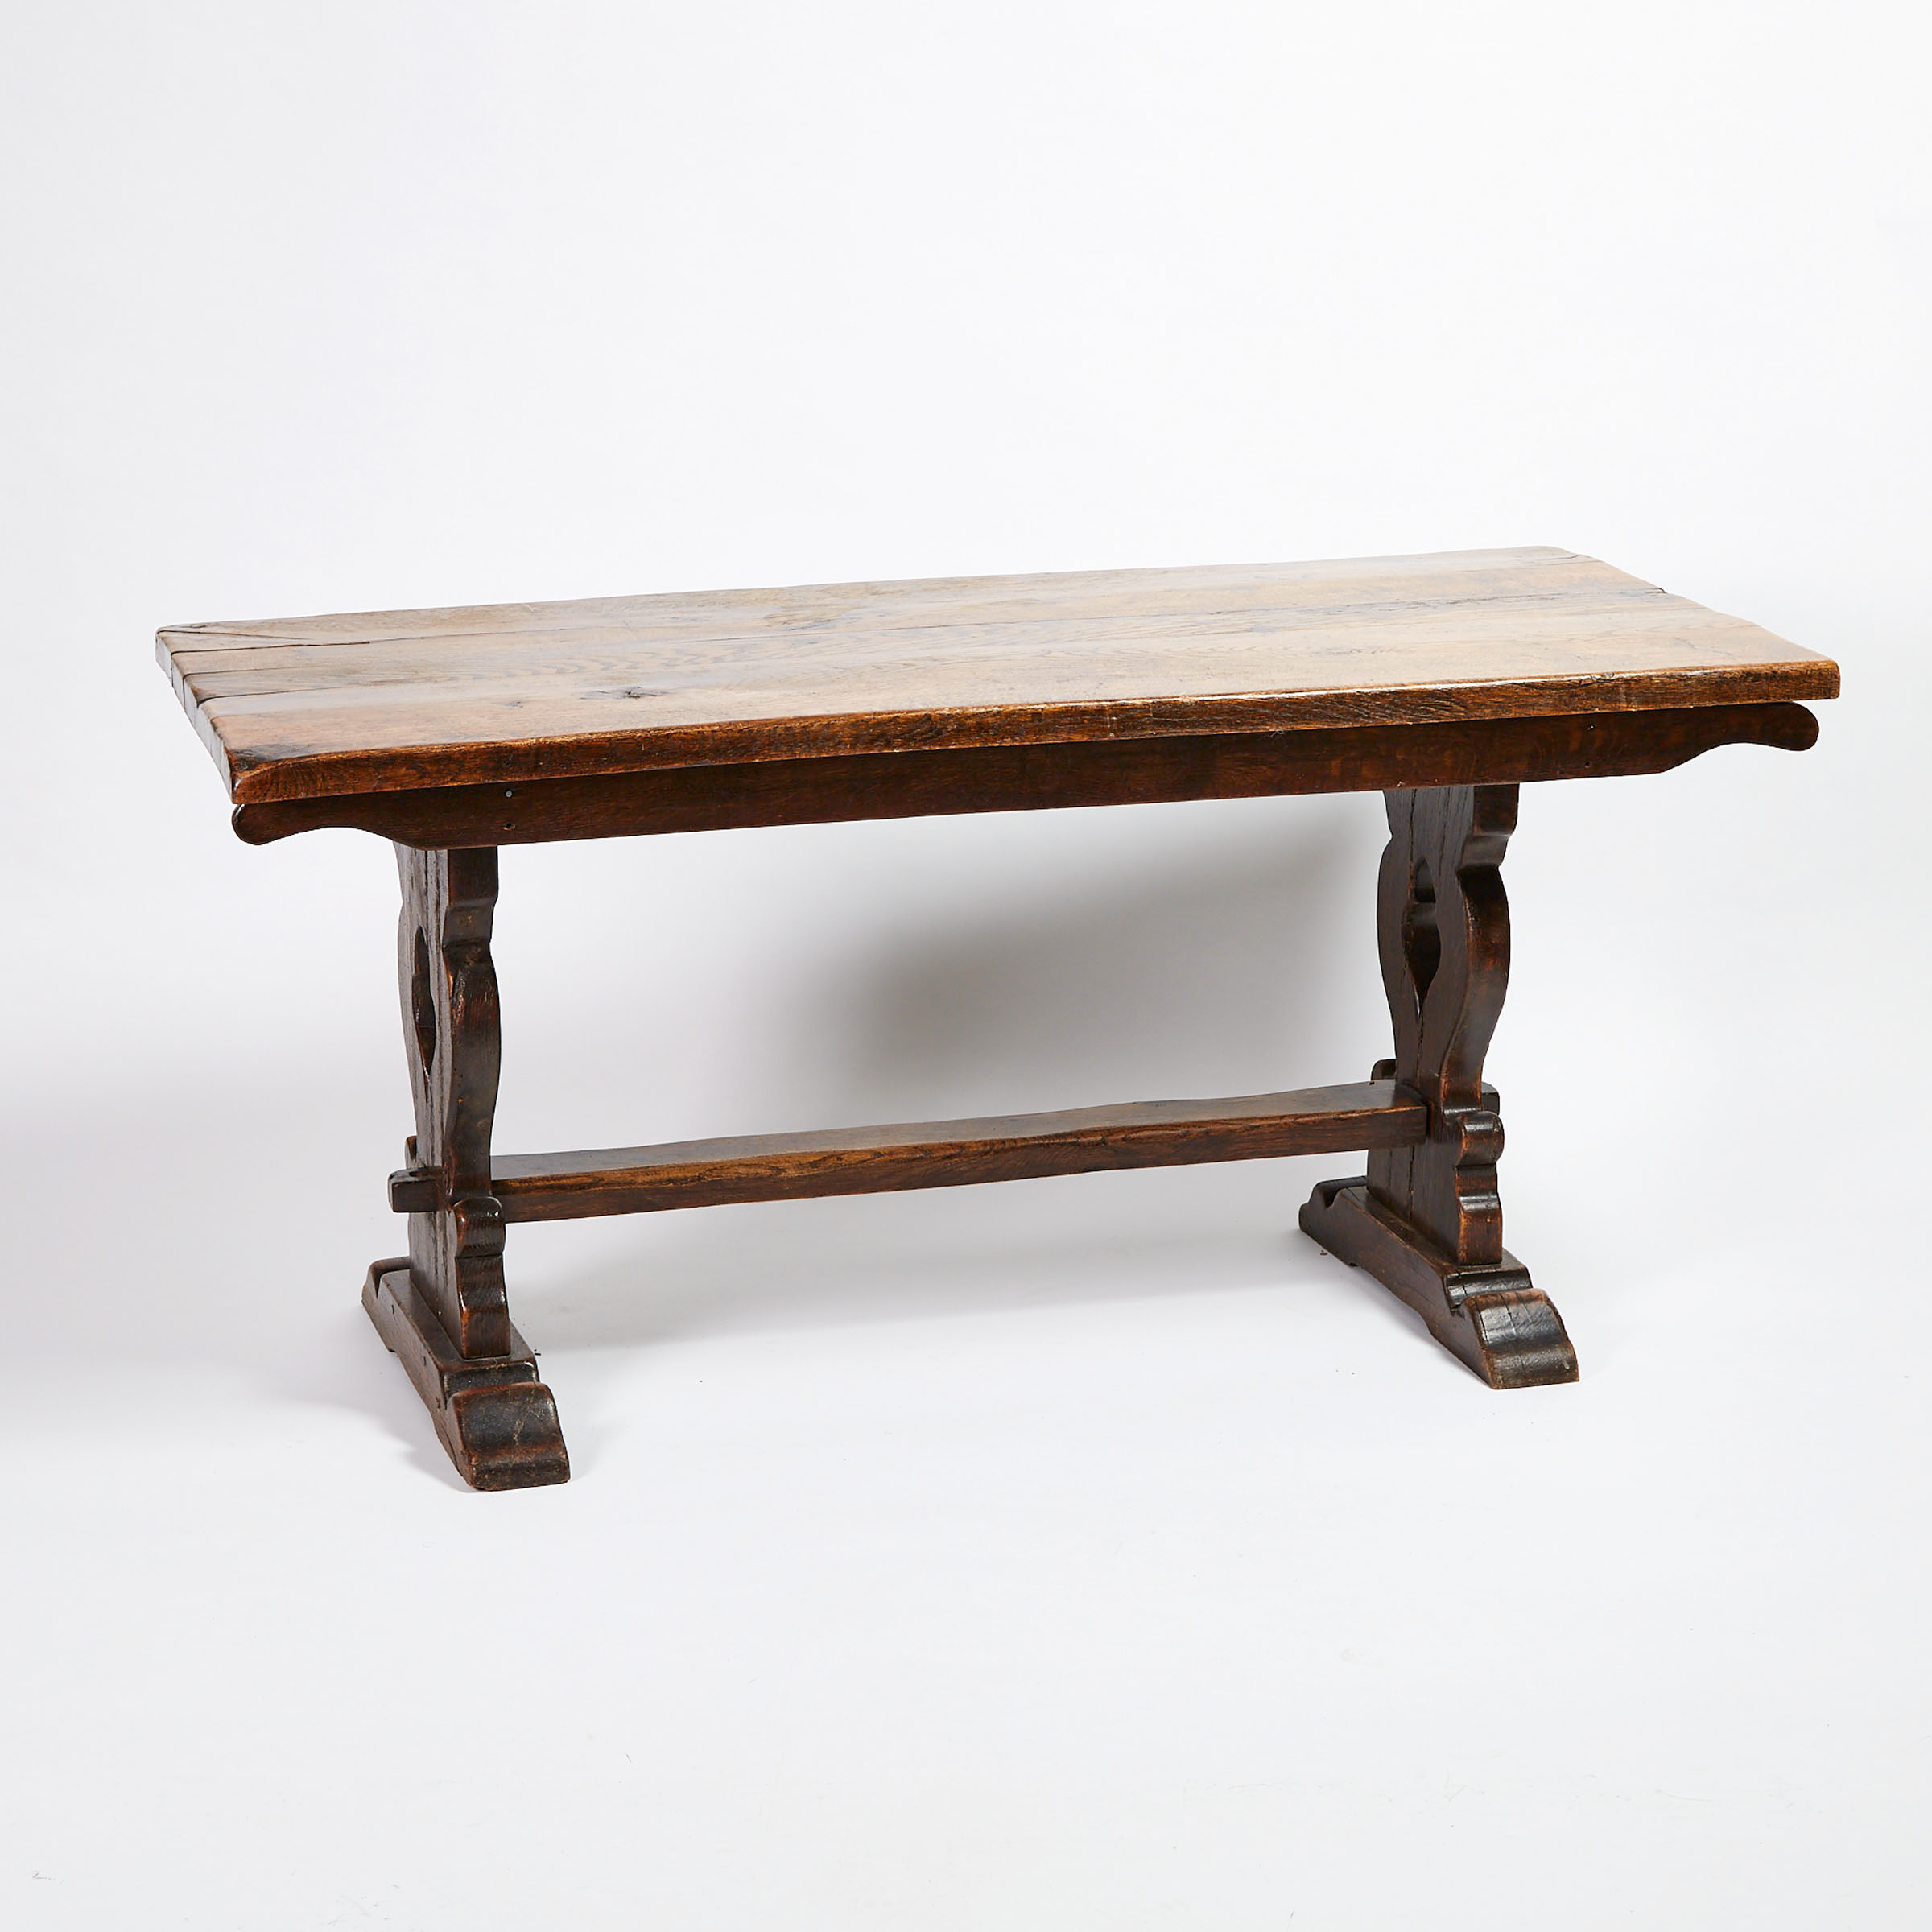 French Oak Refectory Table, 19th century